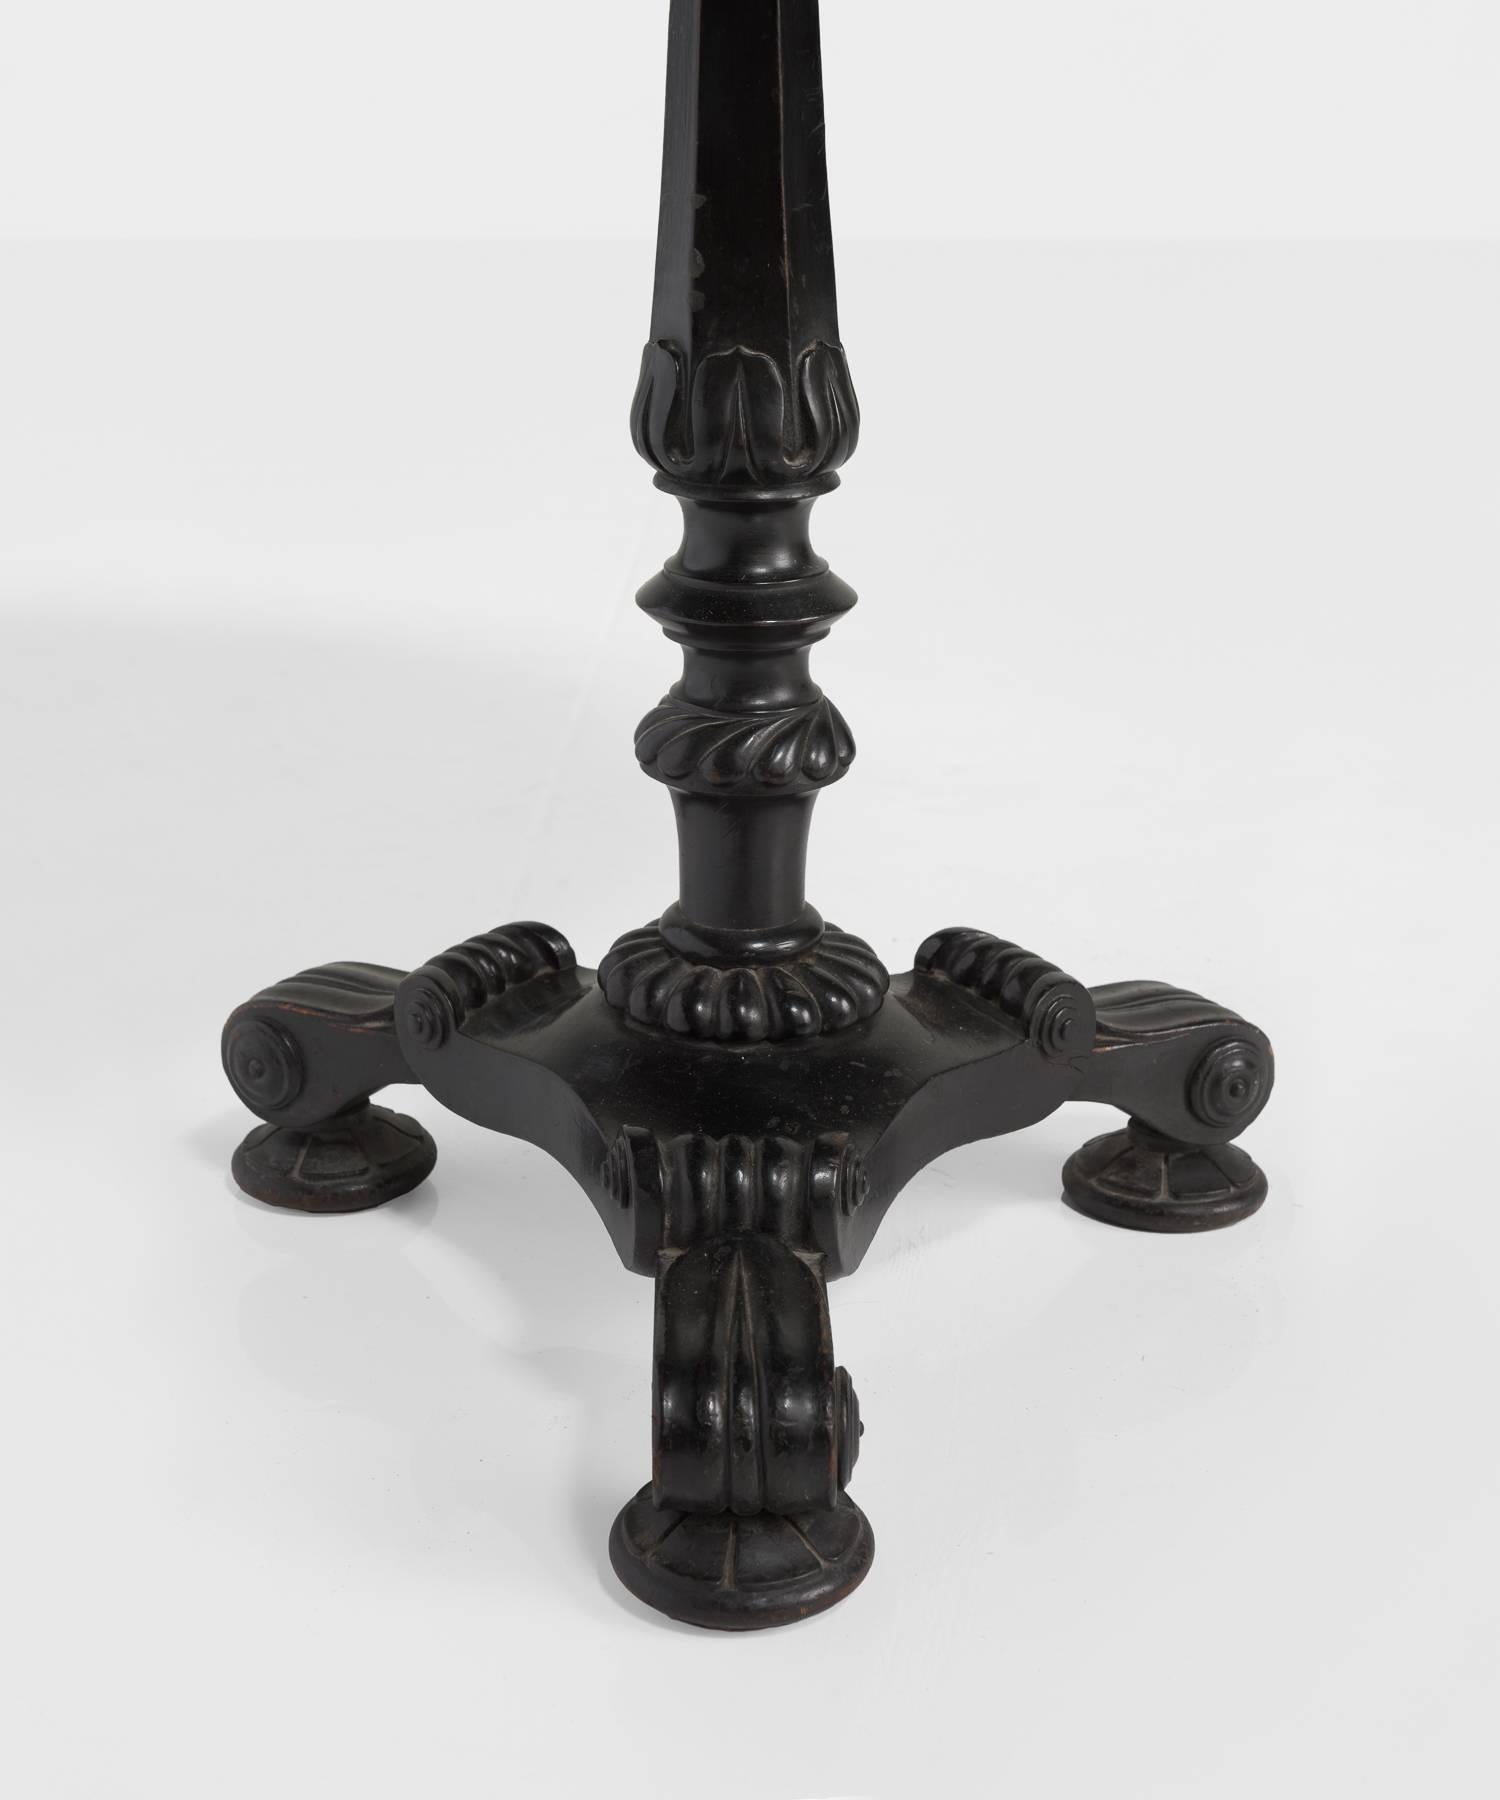 Victorian pedestal table, circa 1840

Black lacquered, gilt and polychrome decorated pedestal table with papier-mache construction. A beautifully painted top features a floral bouquet, birds, and a fountain, centered on a gilt trellis border.